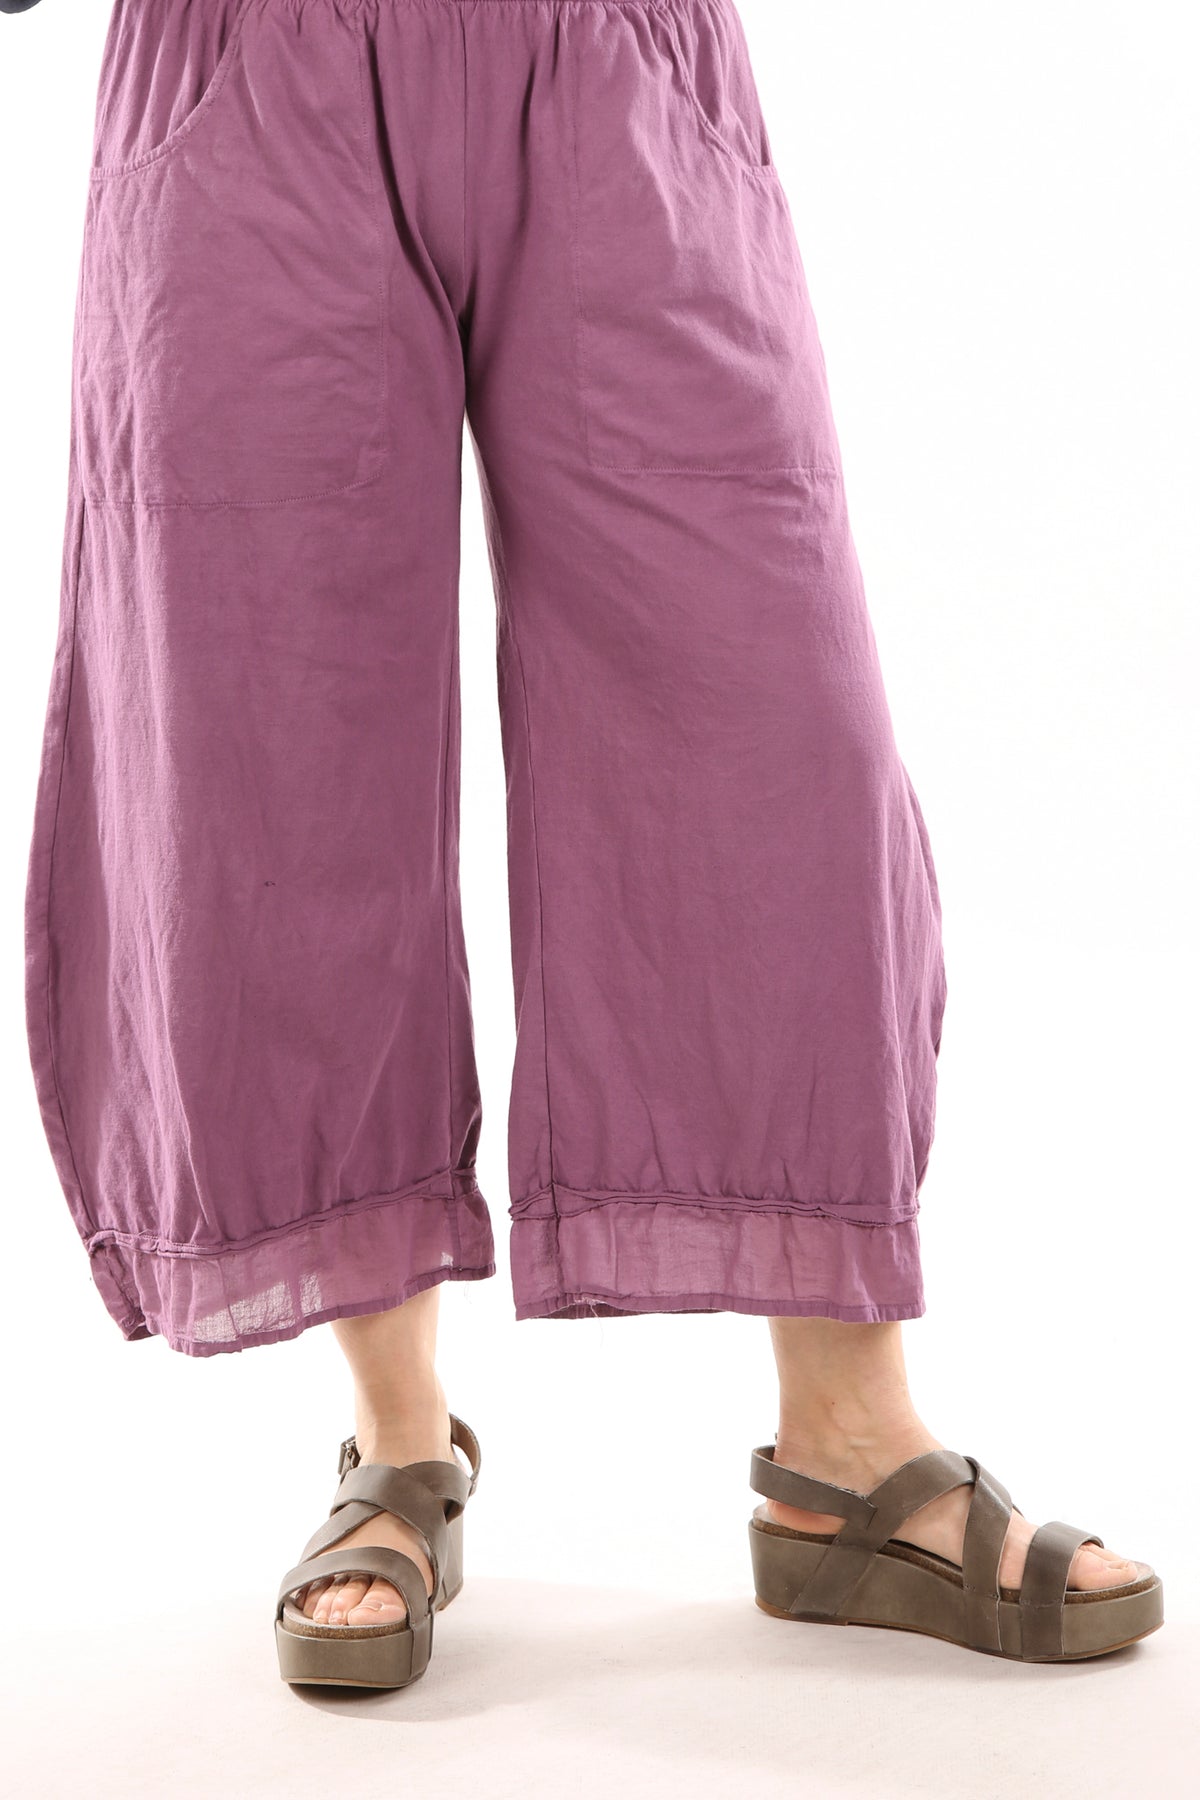 3288 Nepenthe Pant-Orchid Unprinted